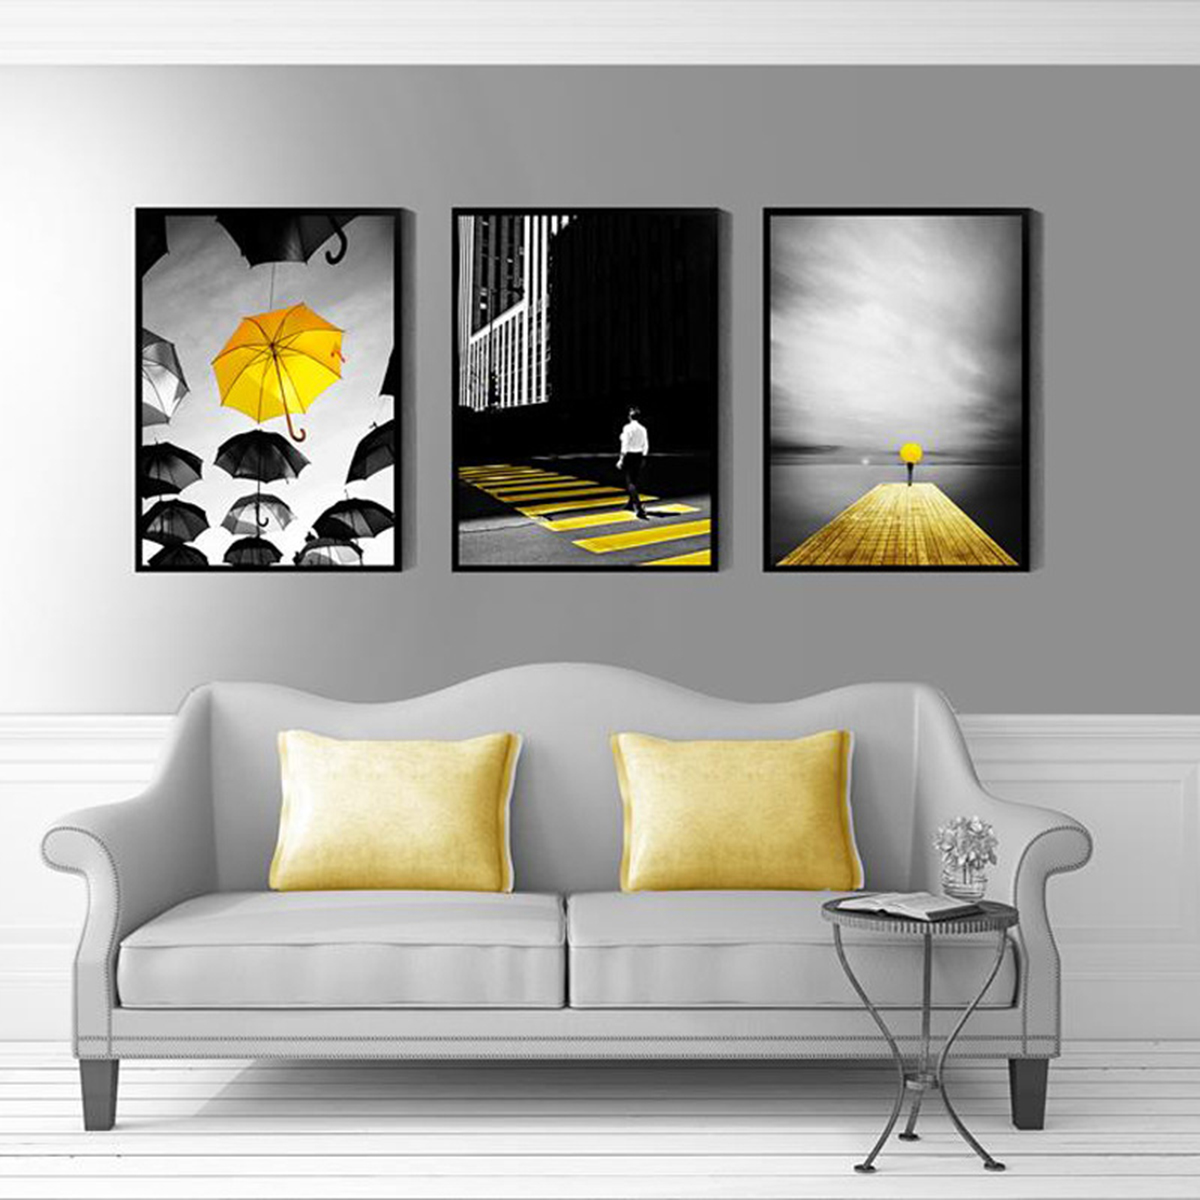 3Pcs-City-Scenery-Canvas-Paintings-Wall-Decorative-Print-Art-Pictures-Unframed-Wall-Hanging-Home-Off-1783981-6